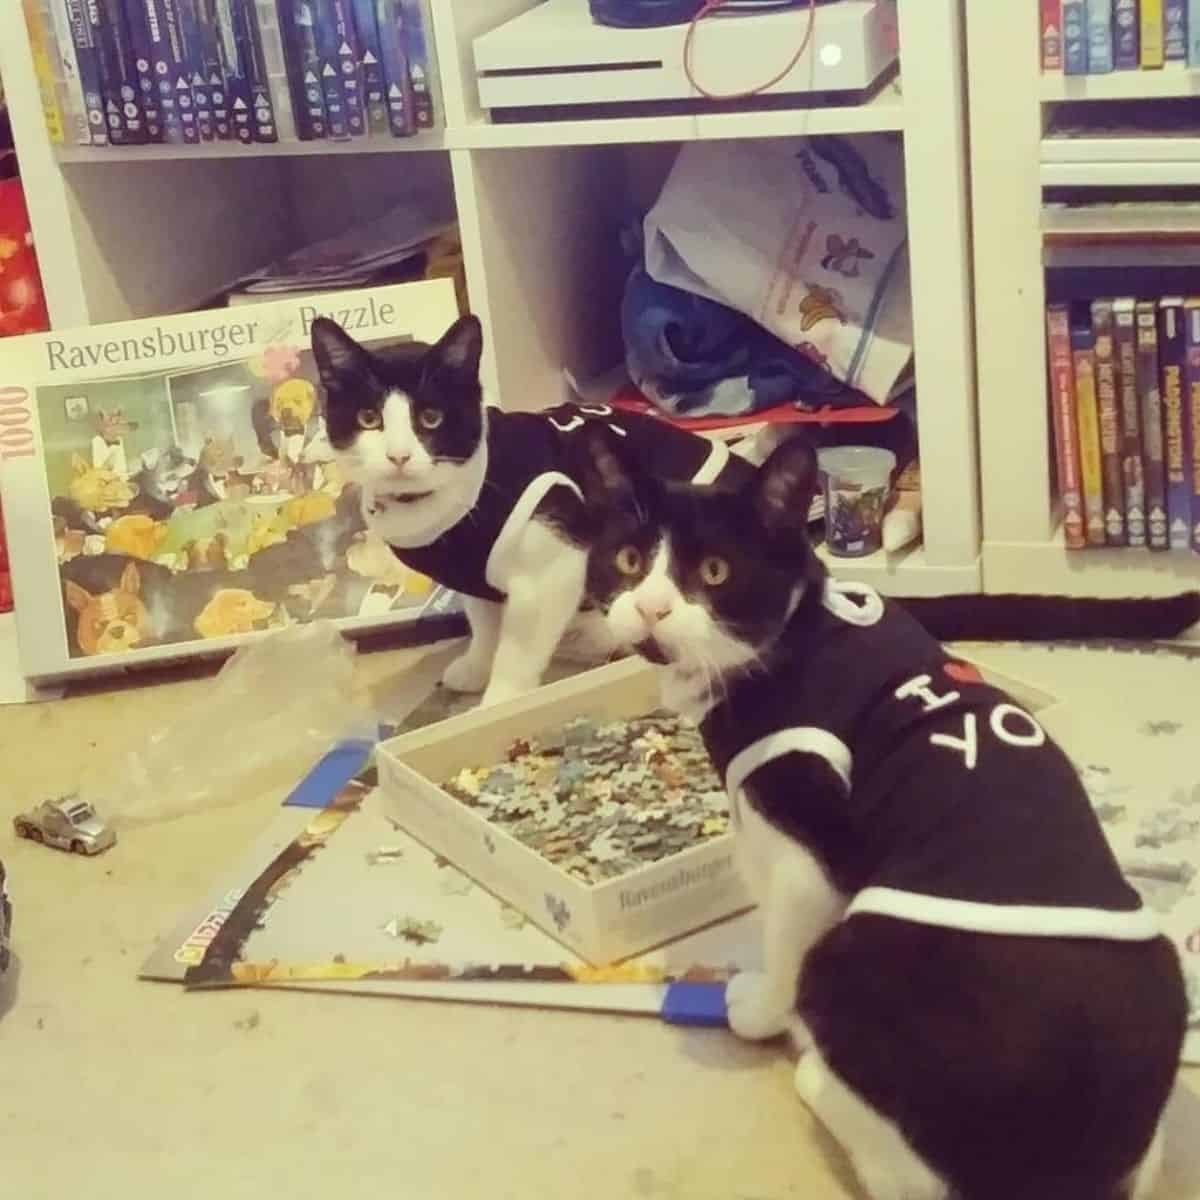 two black and white cats are sitting next to the puzzle